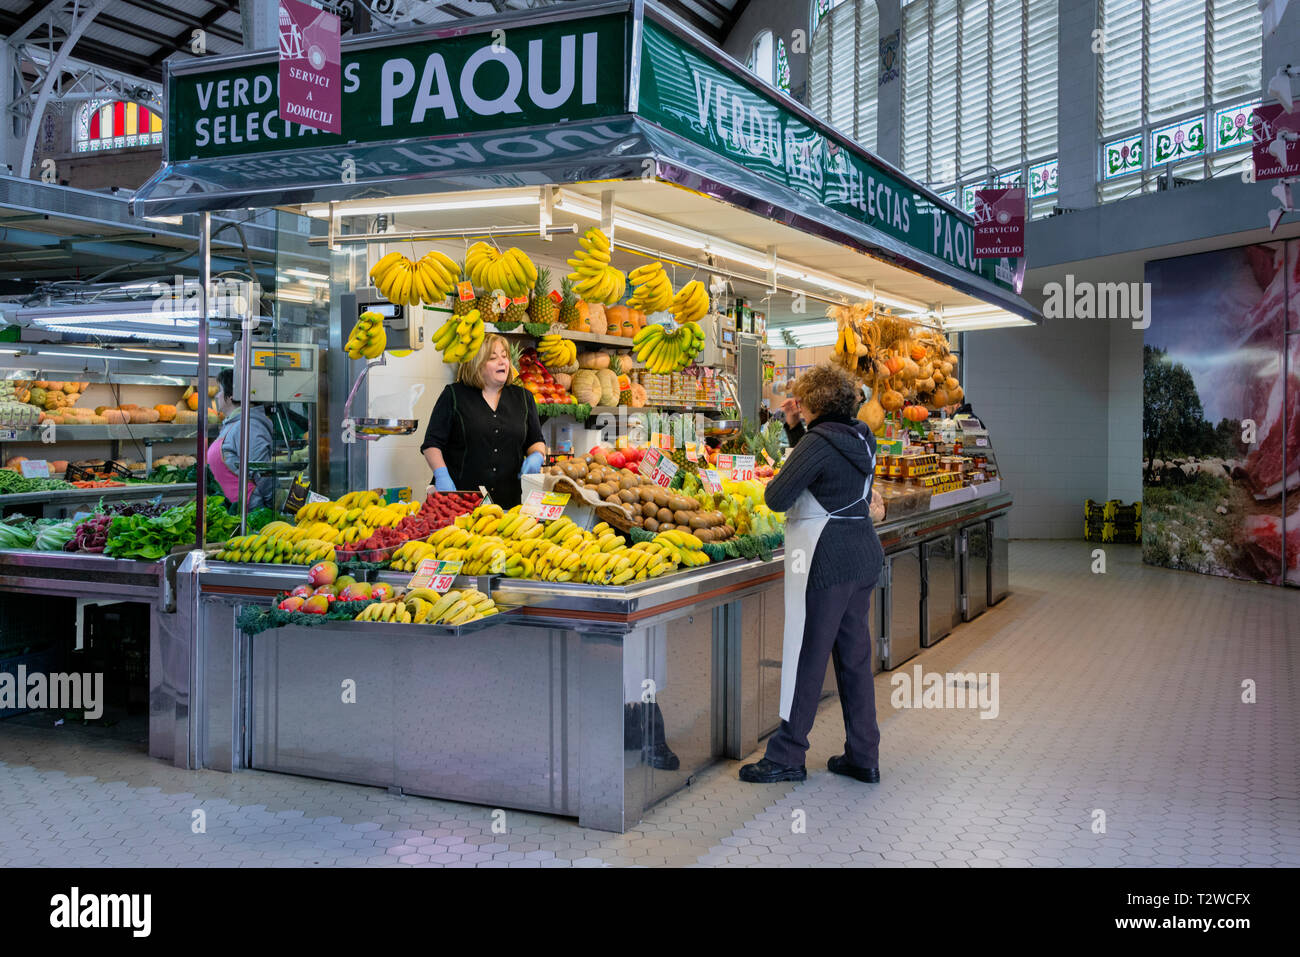 Fruit Stall in the Mercado Central / Mercat Central / Central Market a large indoor market in Valencia Spain Stock Photo